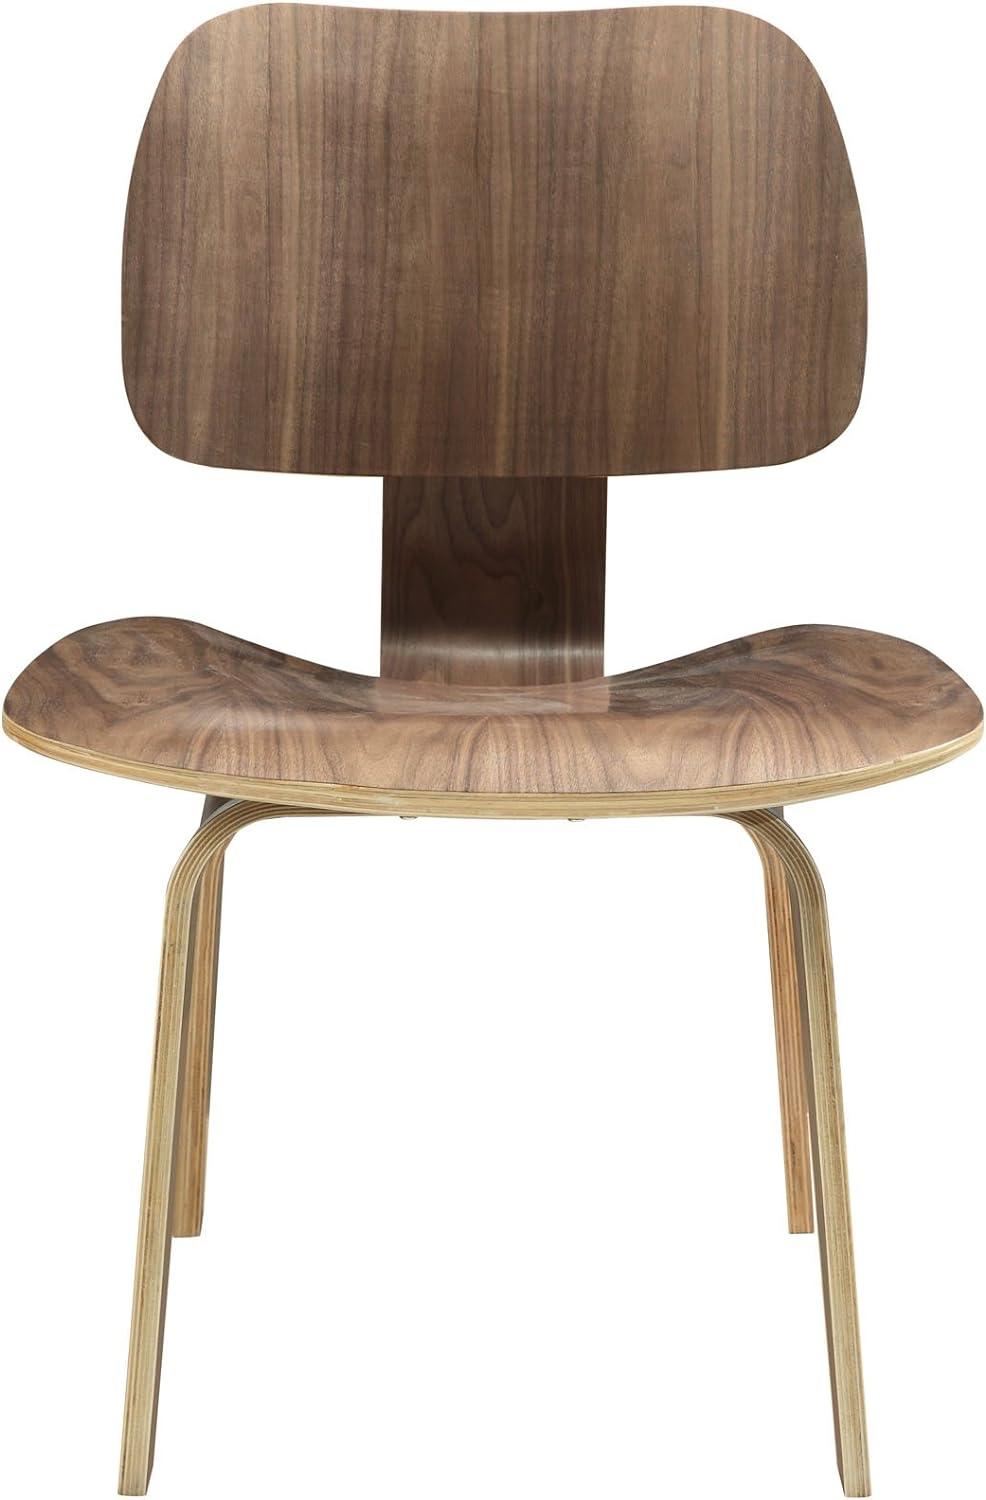 Low Profile Walnut Wood Side Chair with Natural Design